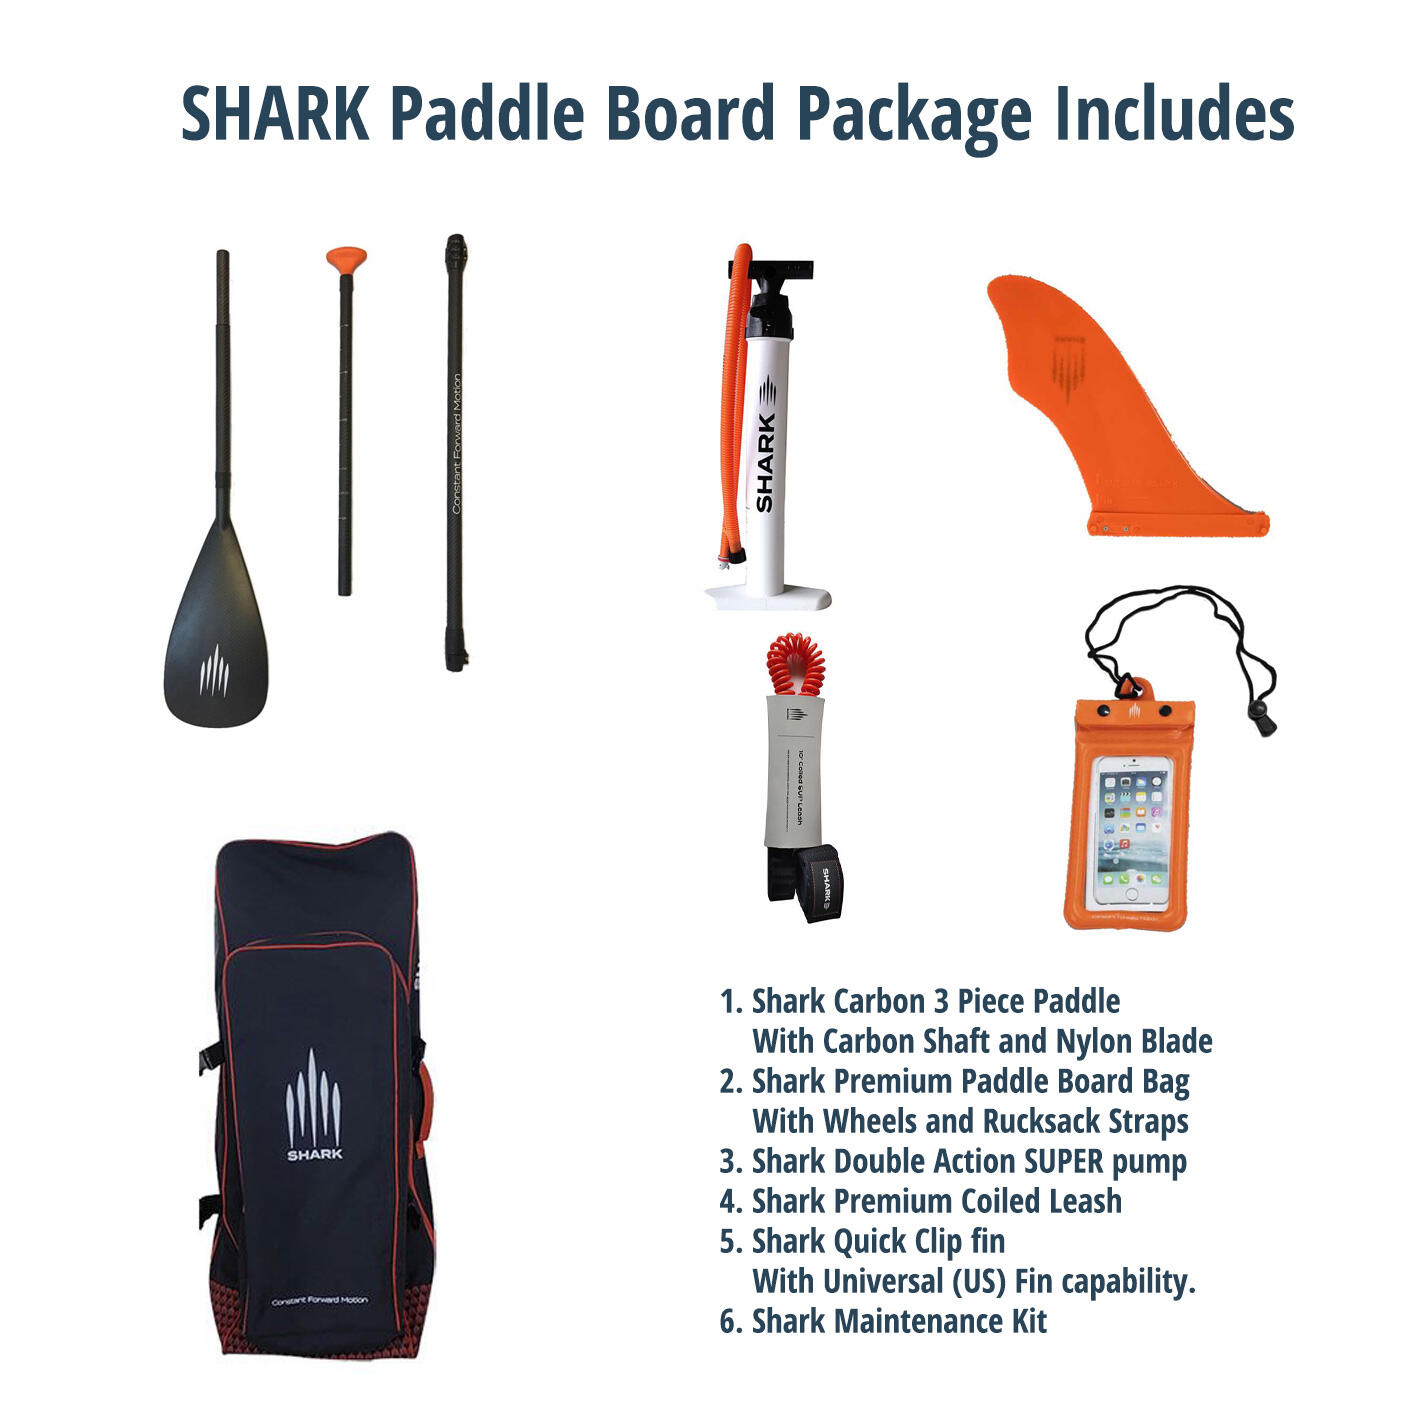 SHARK TOURING 12'6 x 34" x 6" FOR TALLER AND HEAVIER PADDLEBOARDERS 5/6